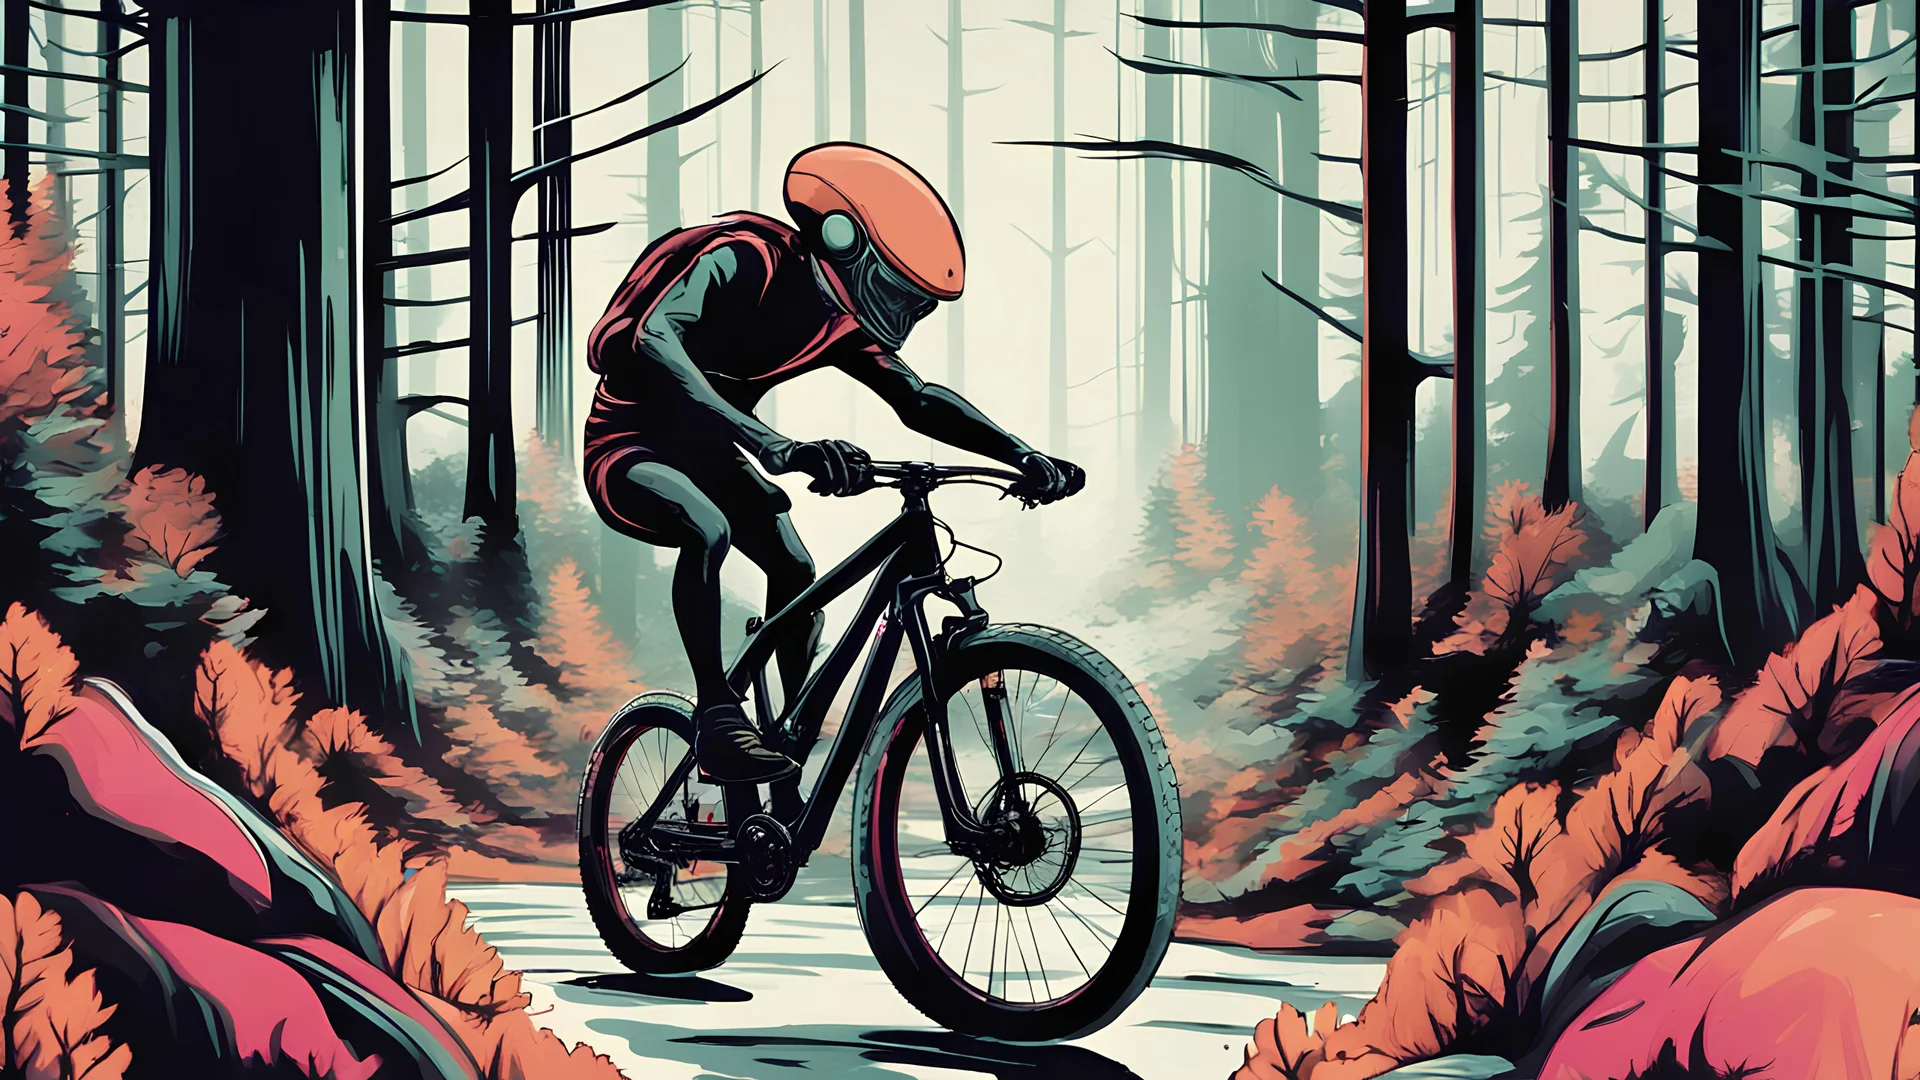 an alien riding verry fast a mountain bike through a futuristic, deep, dark hypnotic colored forest - with extrem motion blur from the center